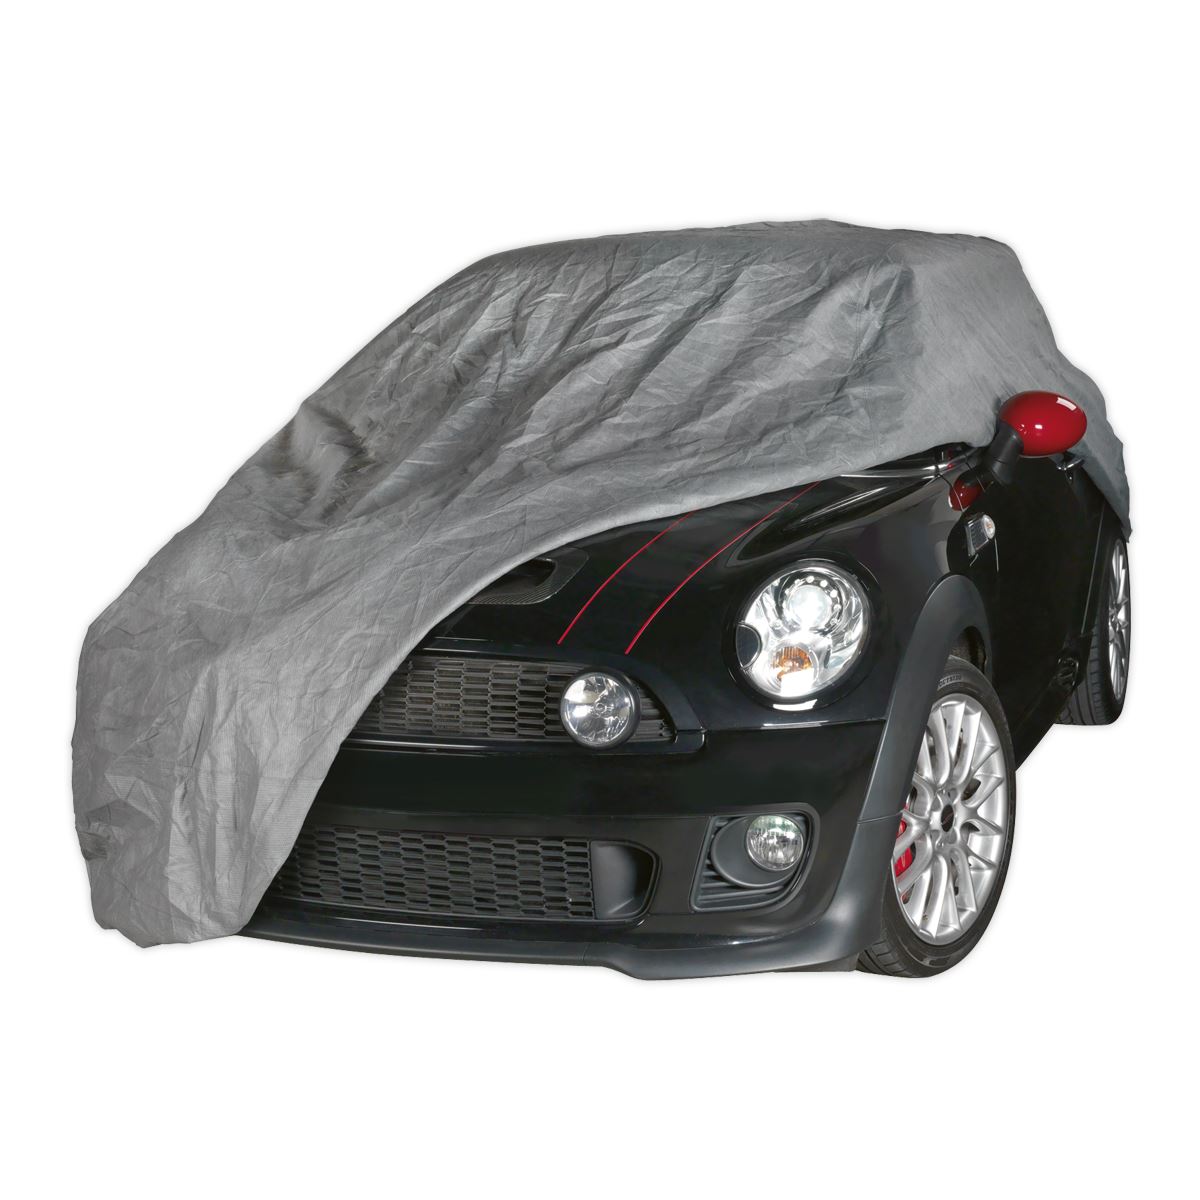 Sealey Premier All Seasons Car Cover 3-Layer - Small